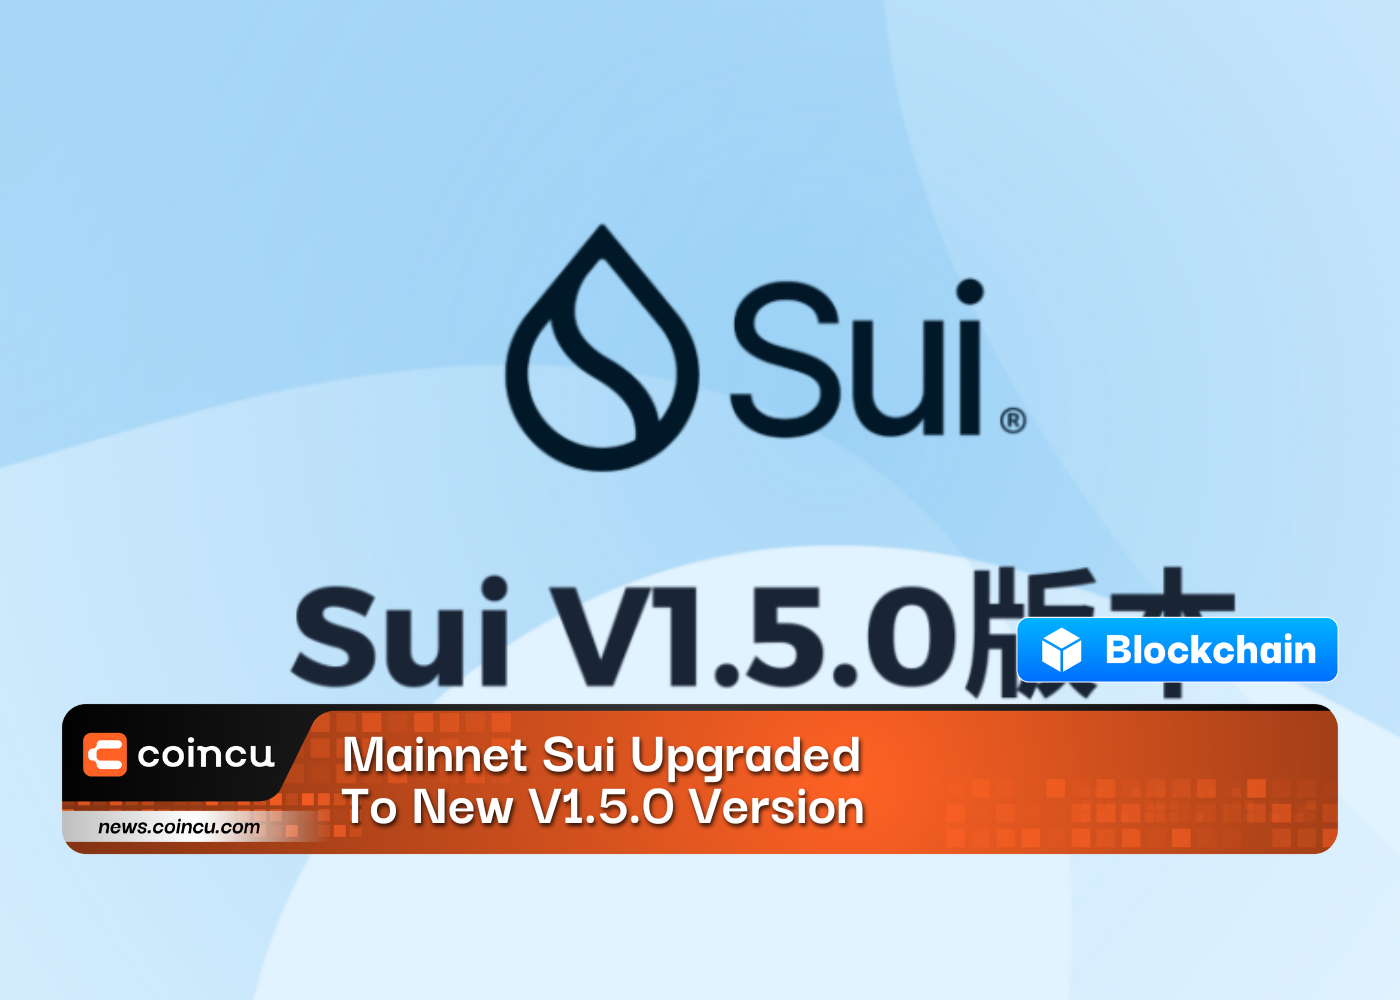 Mainnet Sui Upgraded To New V1.5.0 Version